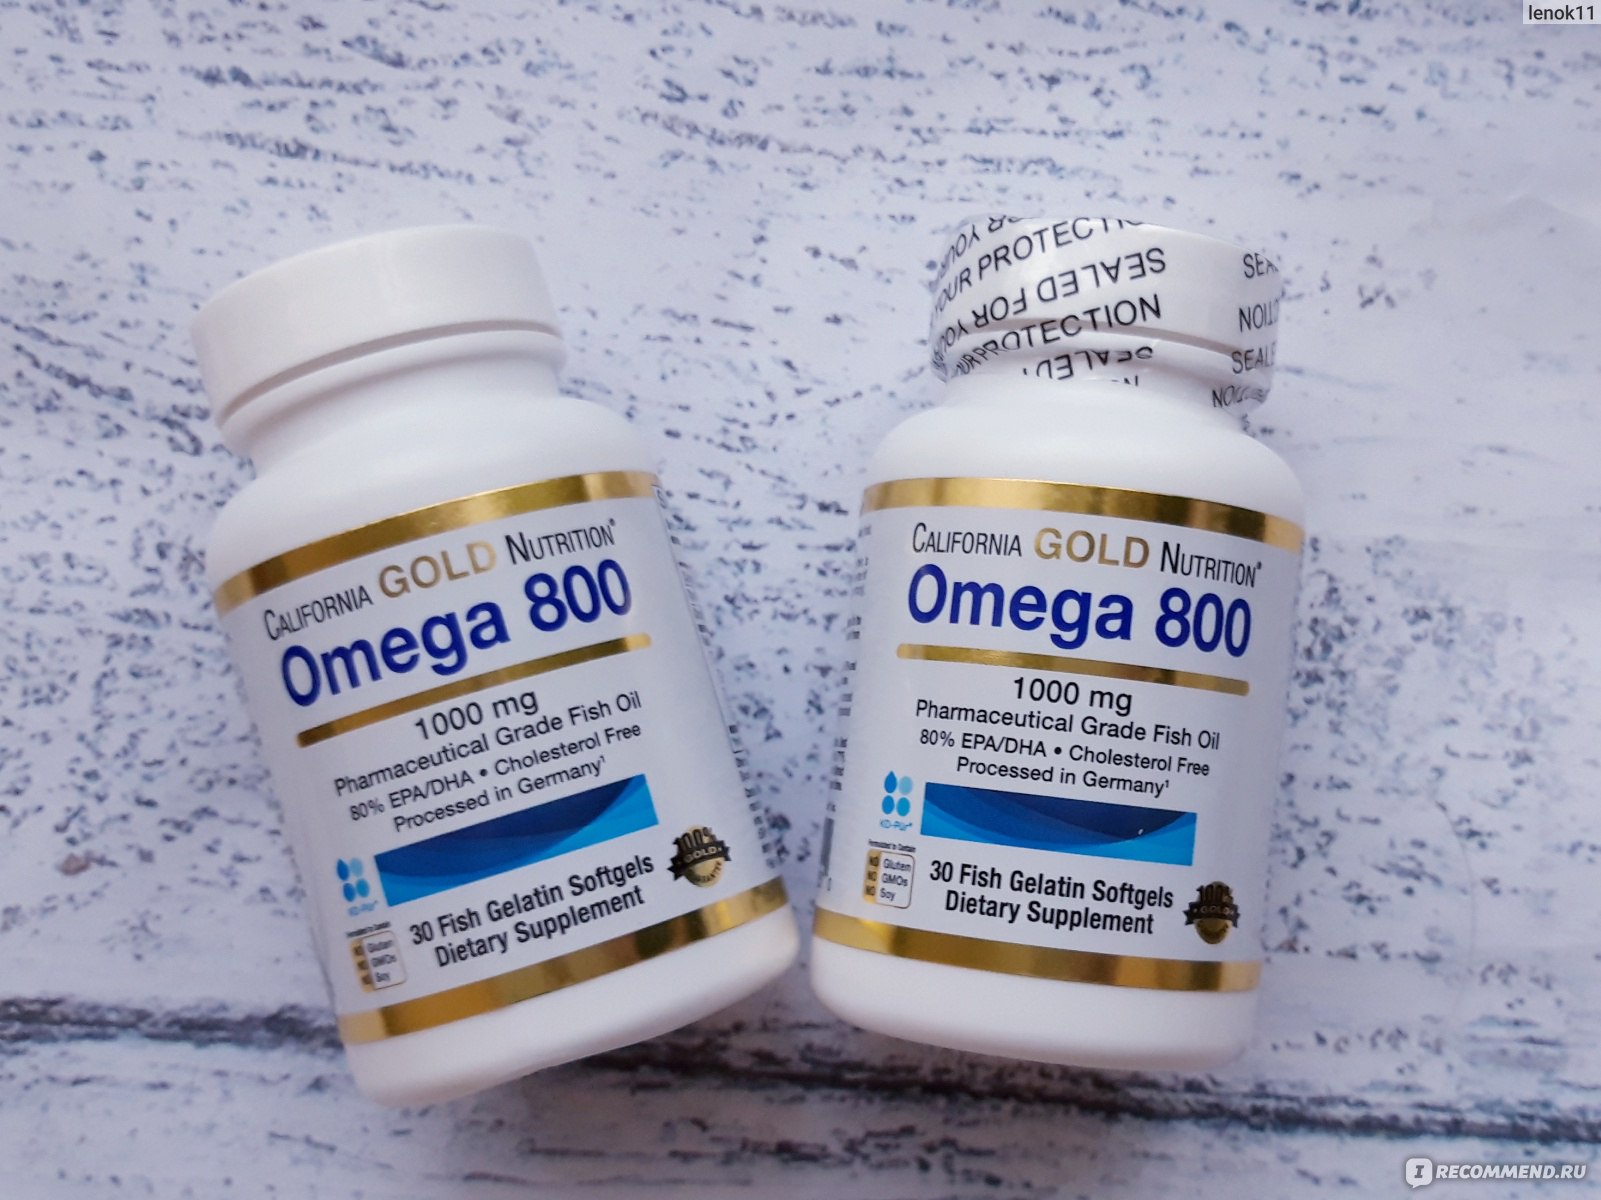 Omega 3 gold капсулы. California Gold Nutrition, Омега 800. Омега-3 800 мг California Gold Nutrition. California Gold Nutrition Omega 800. California Gold Nutrition Omega 800 Fish Oil капсулы.